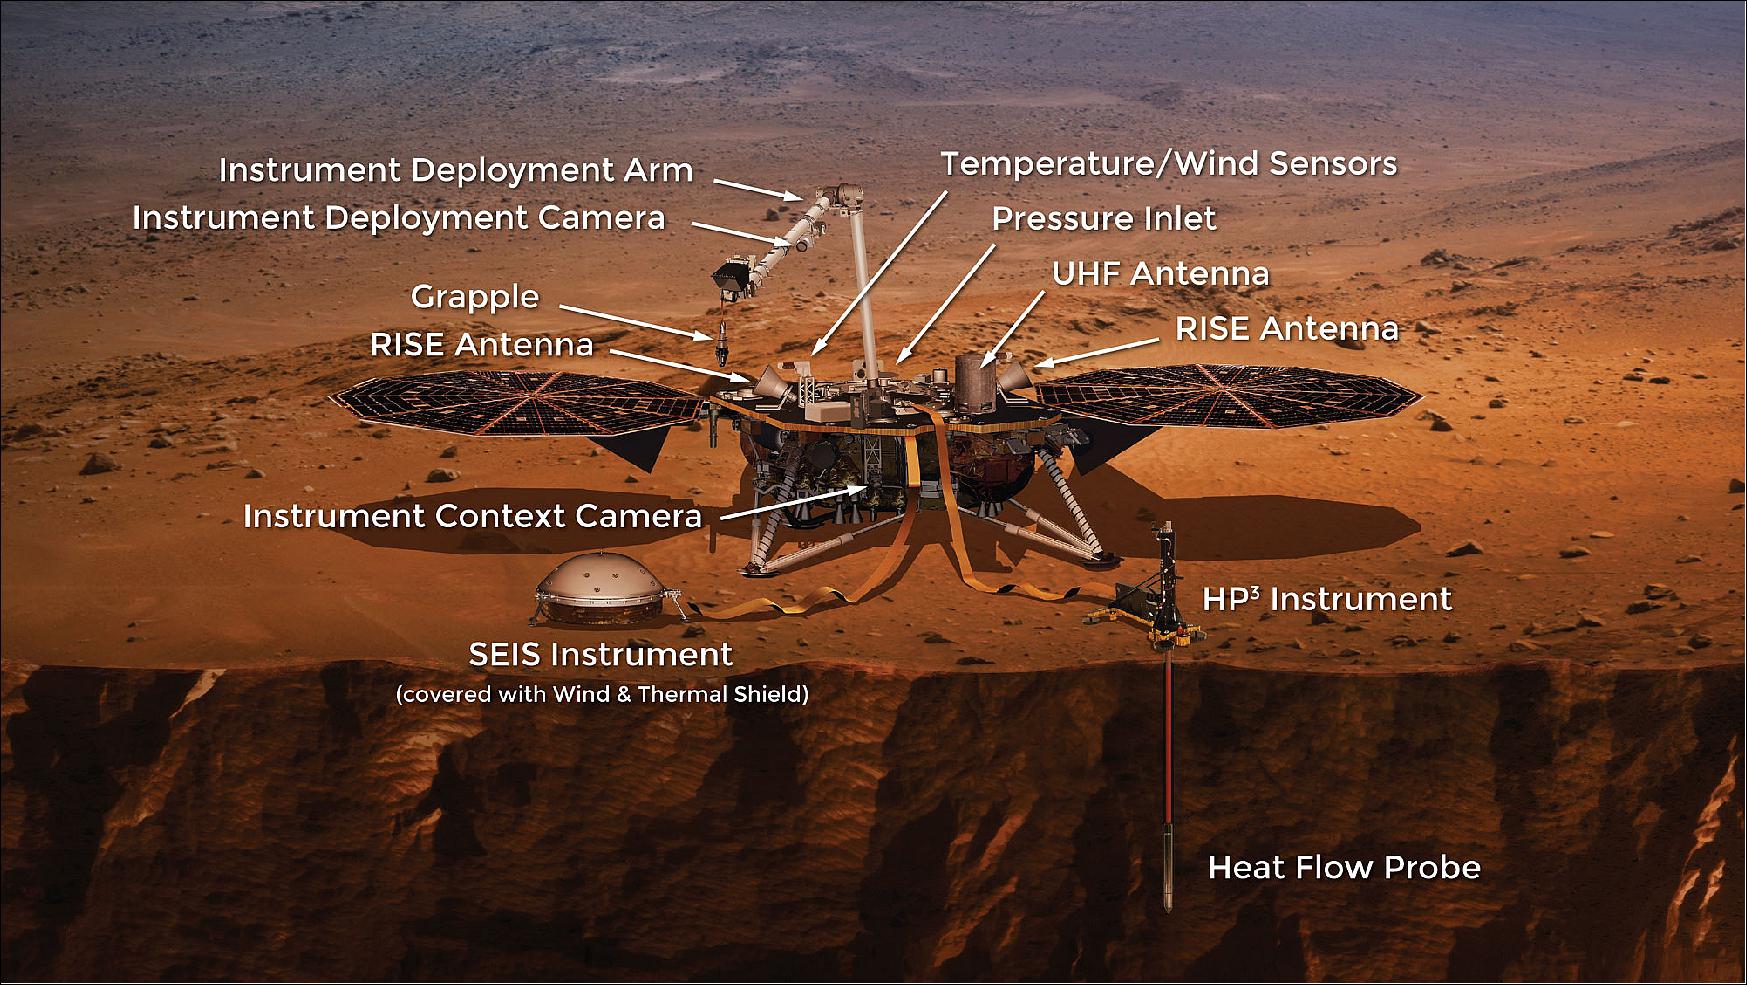 Figure 15: Illustration of the deployed InSight Lander on Mars showing the main components of the lander and the two maon experiments (image credit: (image credit: NASA/JPL-Caltech)